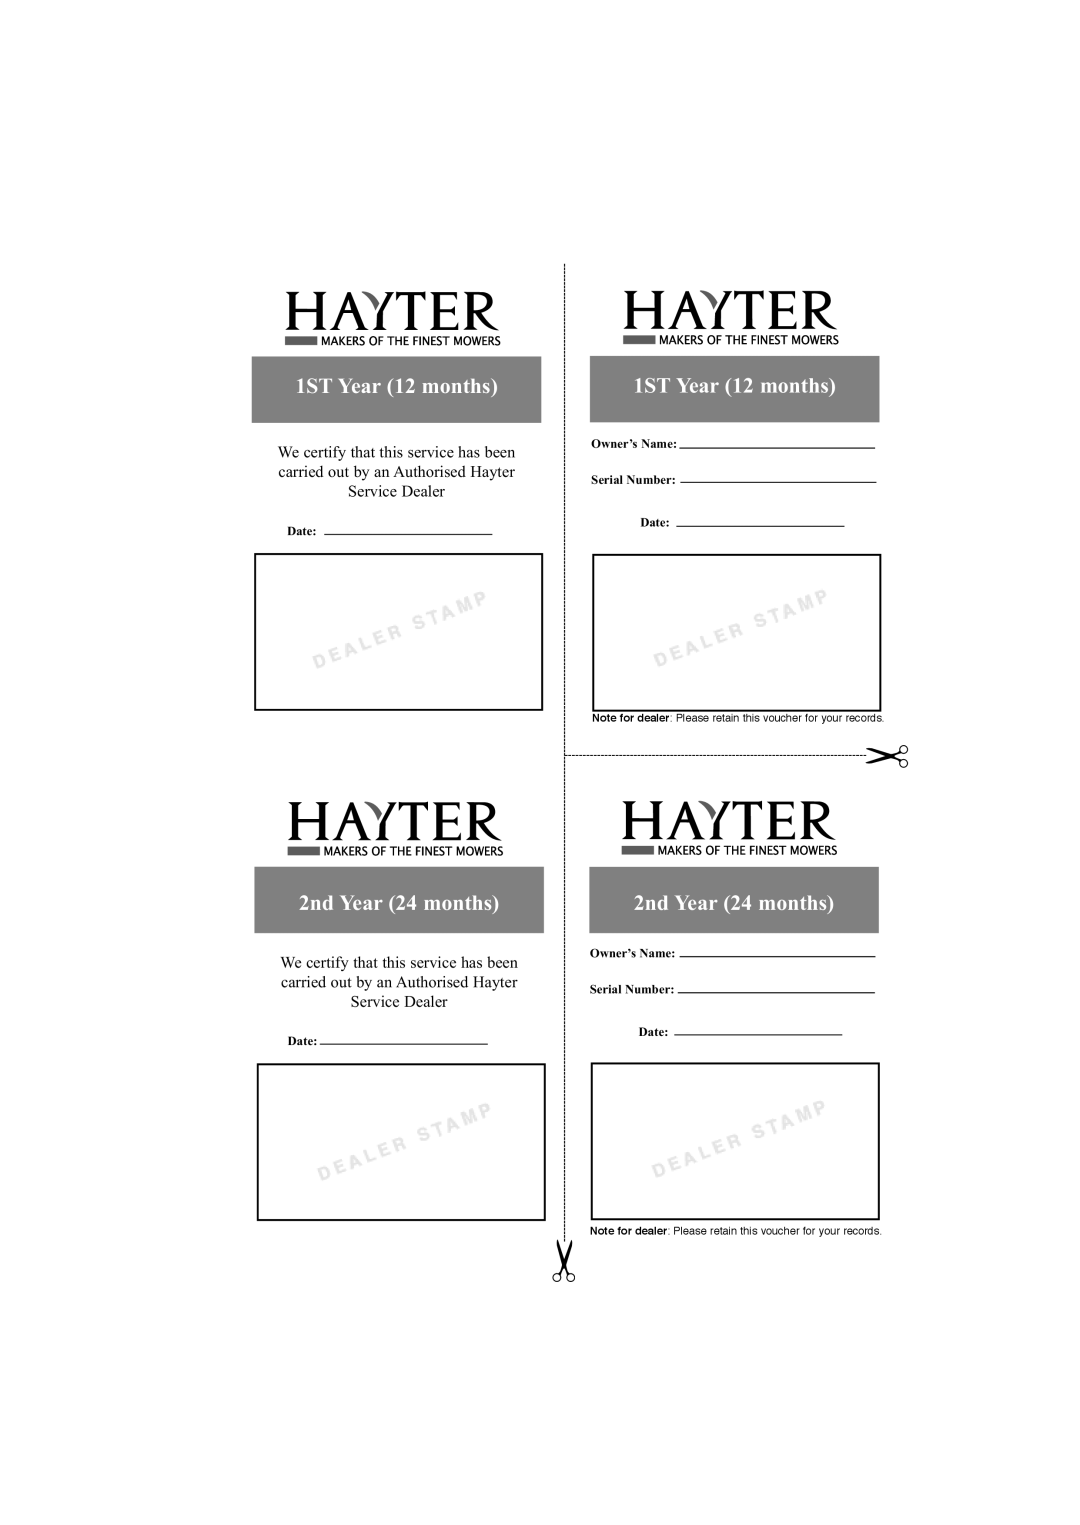 Hayter Mowers 412E, 413E We certify that this service has been, Service Dealer, carried out by an Authorised Hayter, Date 